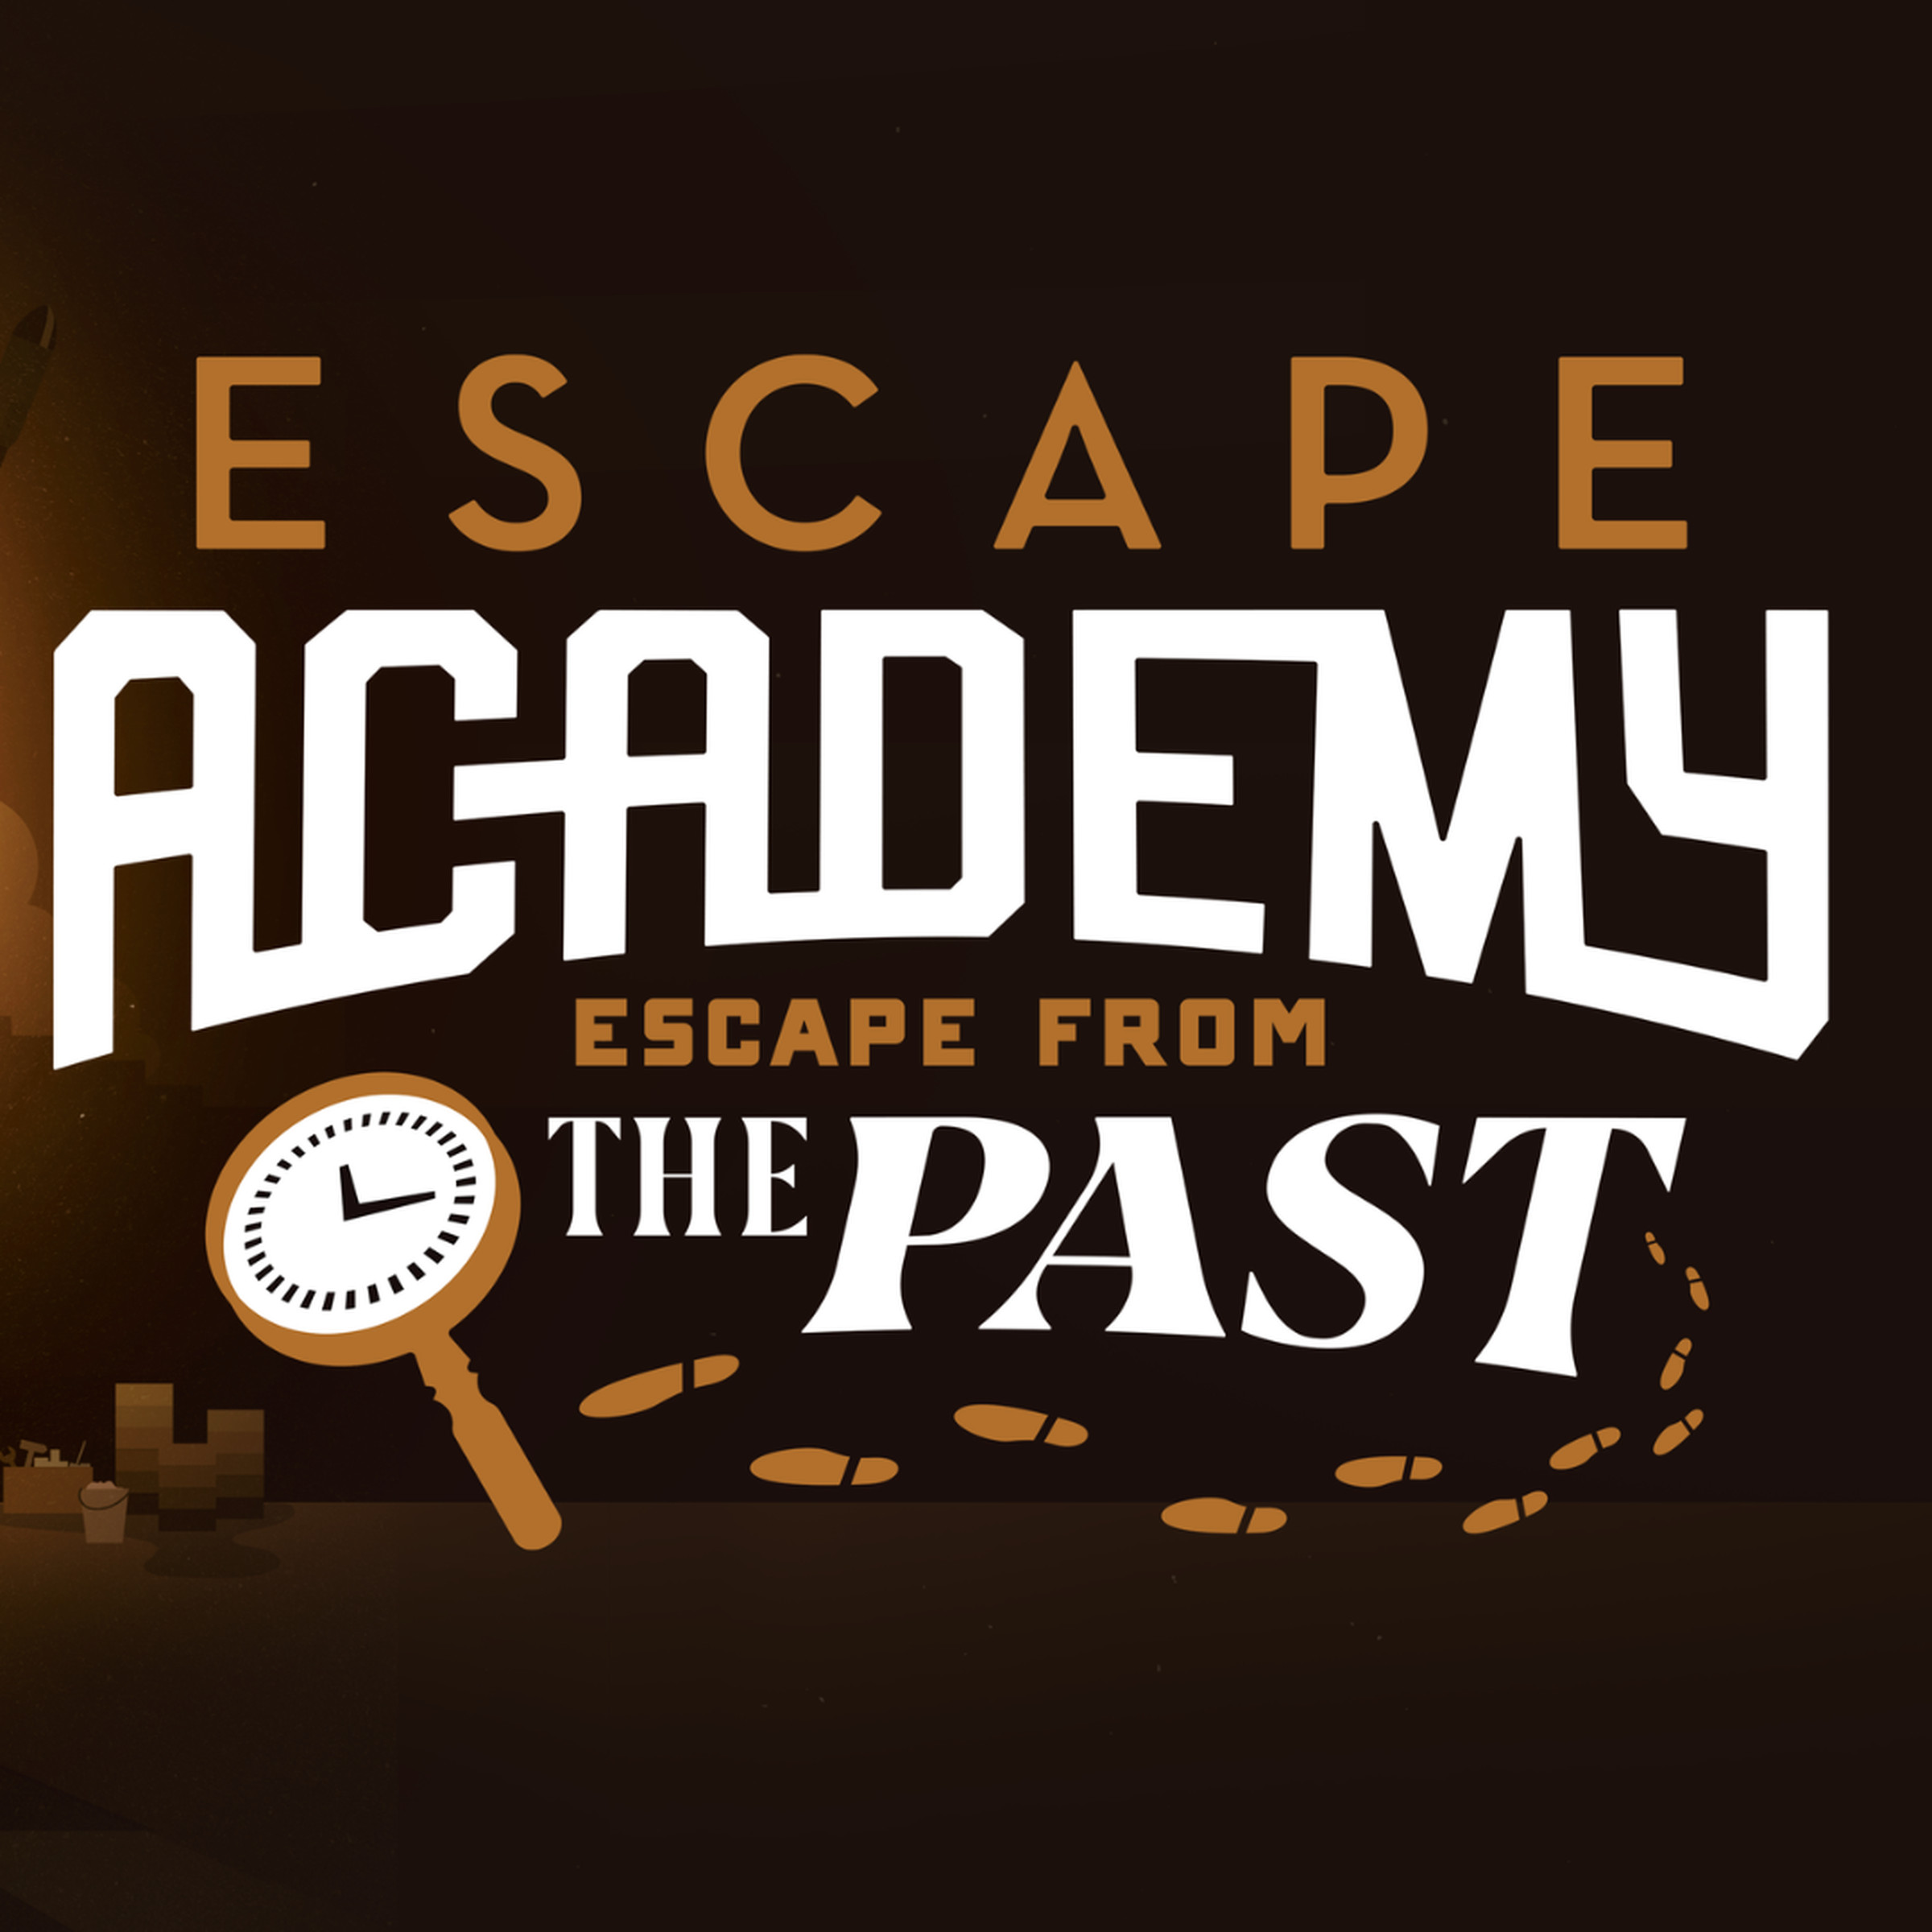 Key Art from Escape Academy featuring the text Escape Academy Escape From The Past DLC and two characters standing in the light of a castle doorway